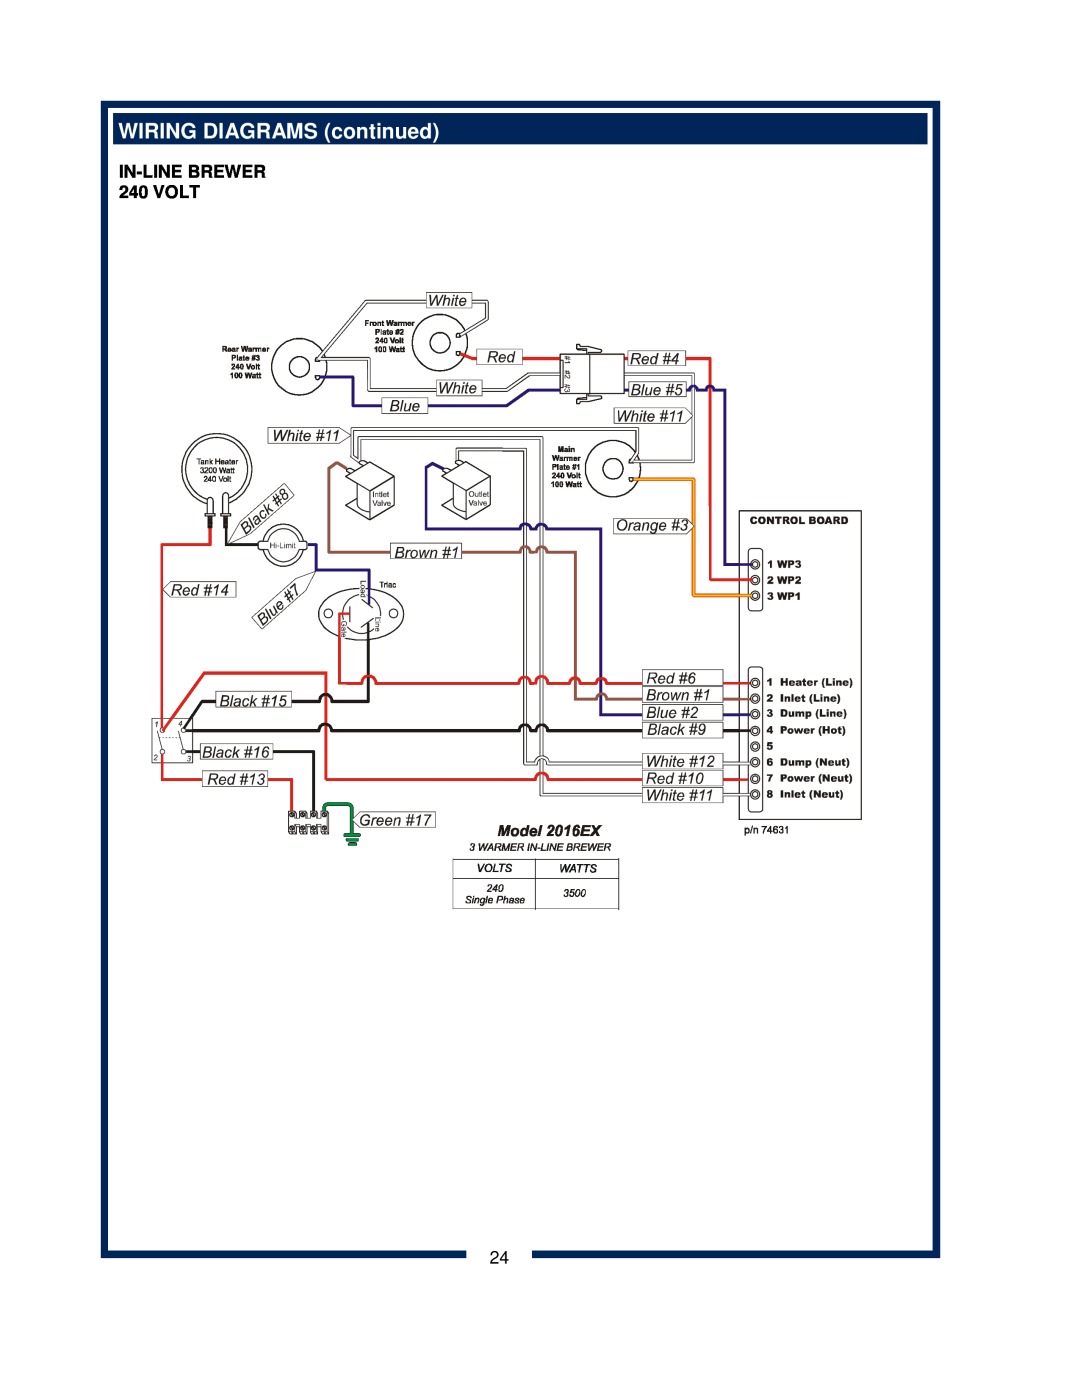 Bloomfield 2016EX, 2074L, 2072FRL, 2012, 2074FRL, 2072L owner manual WIRING DIAGRAMS continued, In-Line Brewer, Volt 